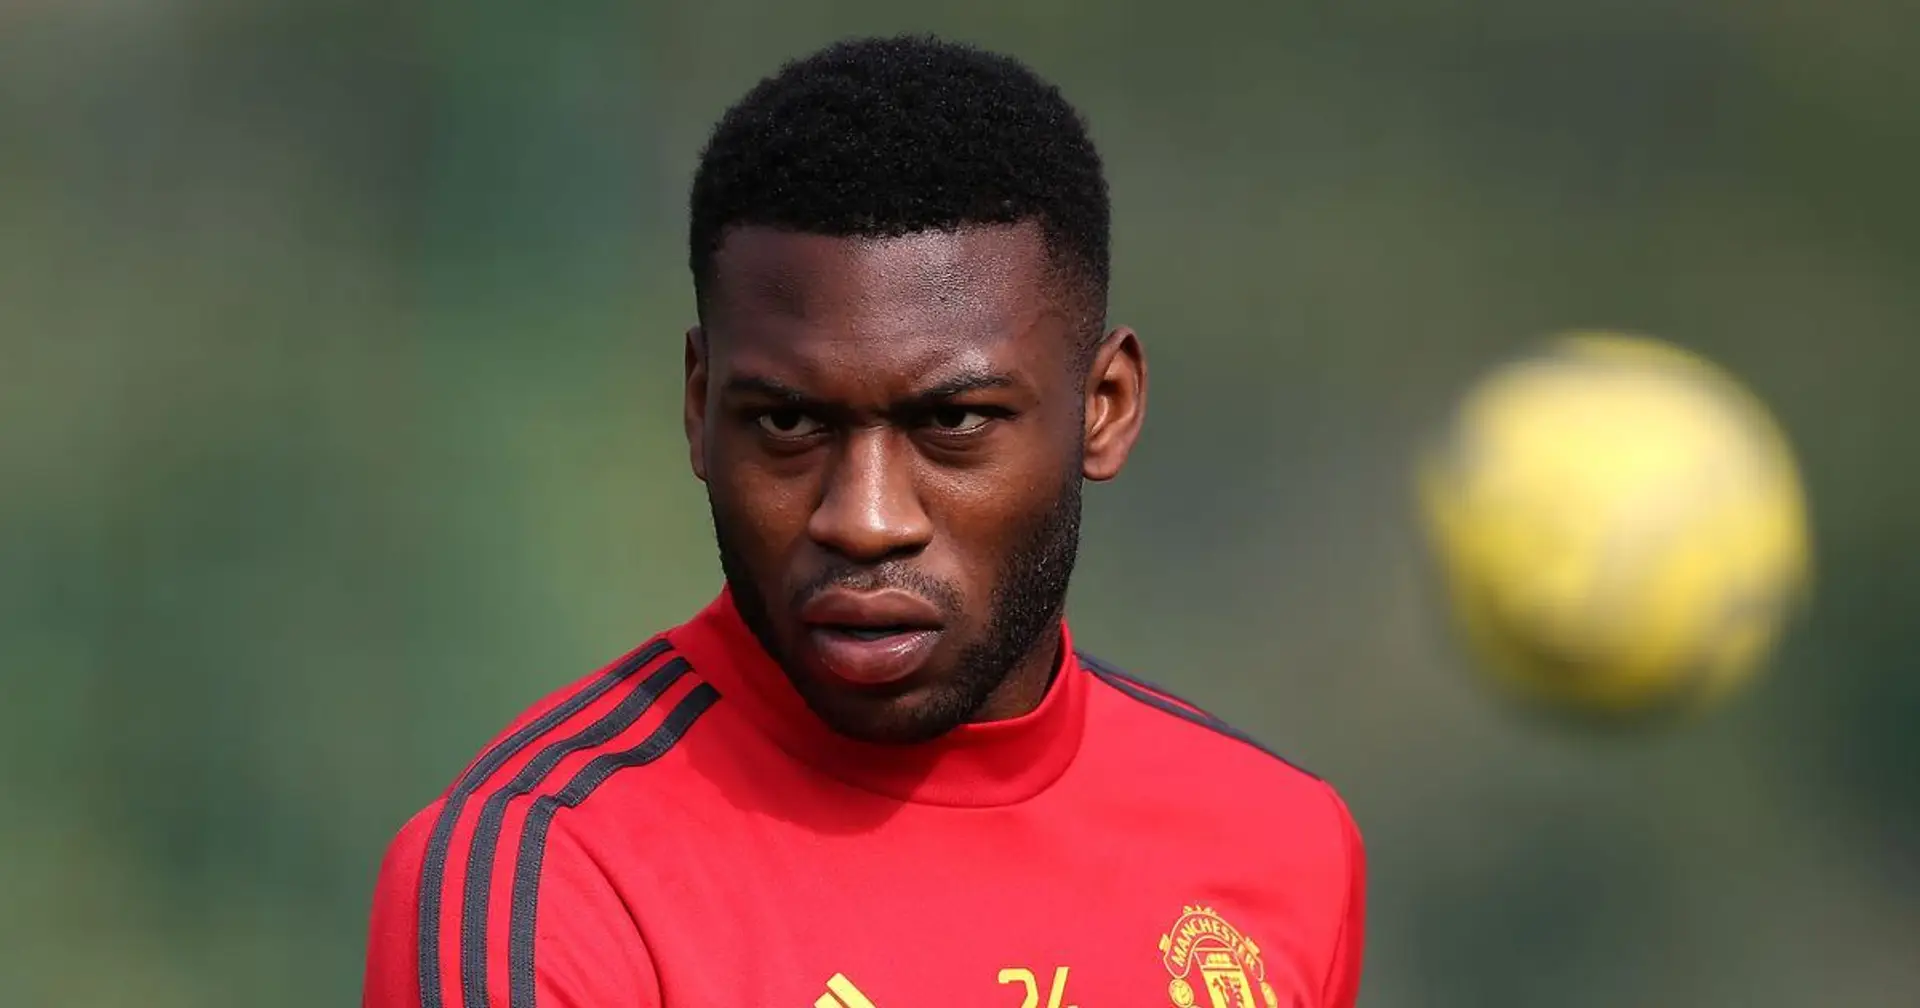 Sky Sports: Man United offer Fosu-Mensah new deal, player considering his options (reliability: 4 stars)